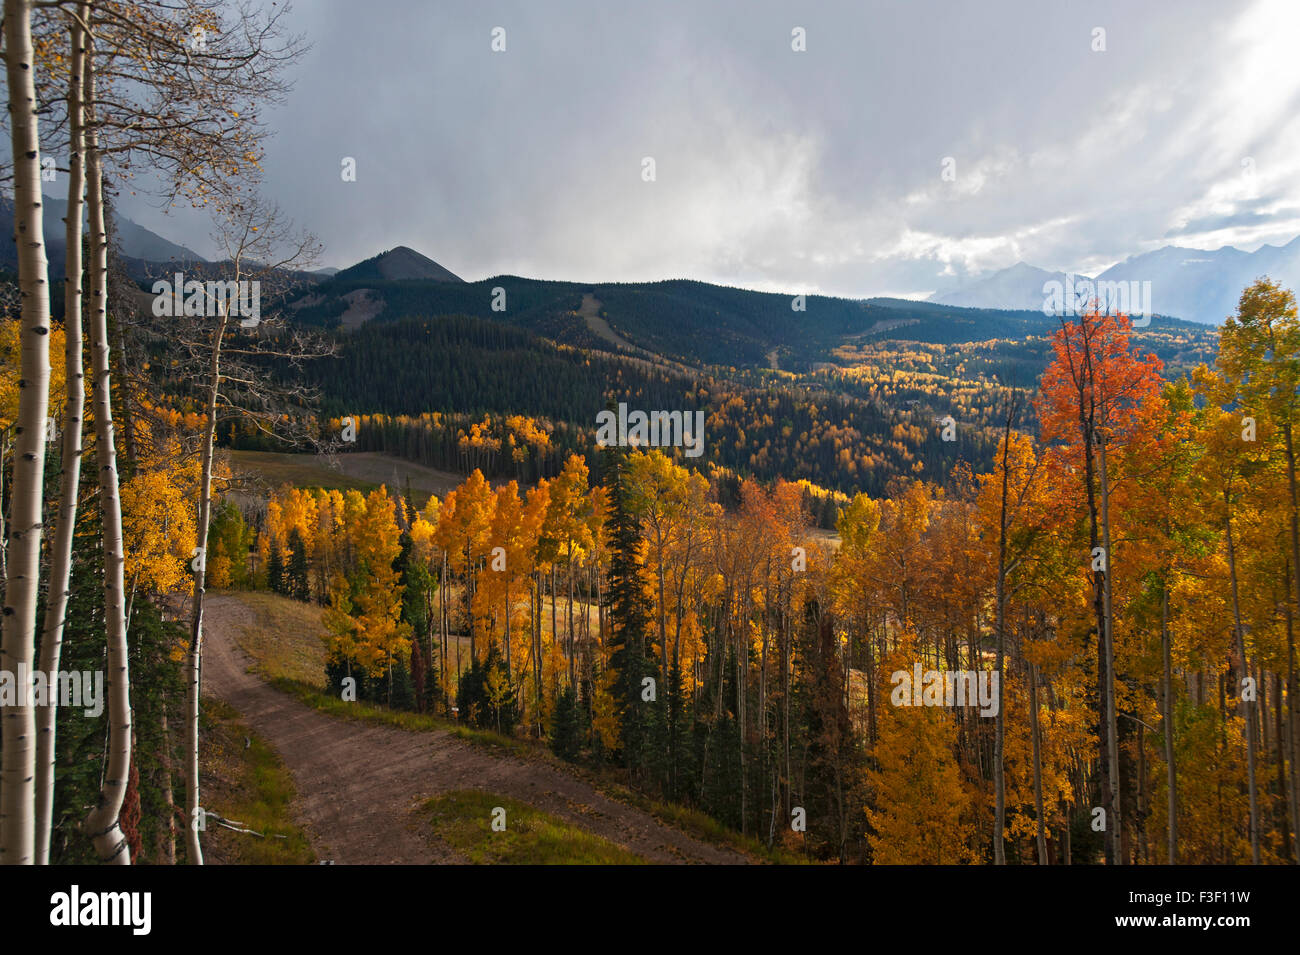 Autumn leaf dispays in Telluride, CO as seen from a gondola Stock Photo